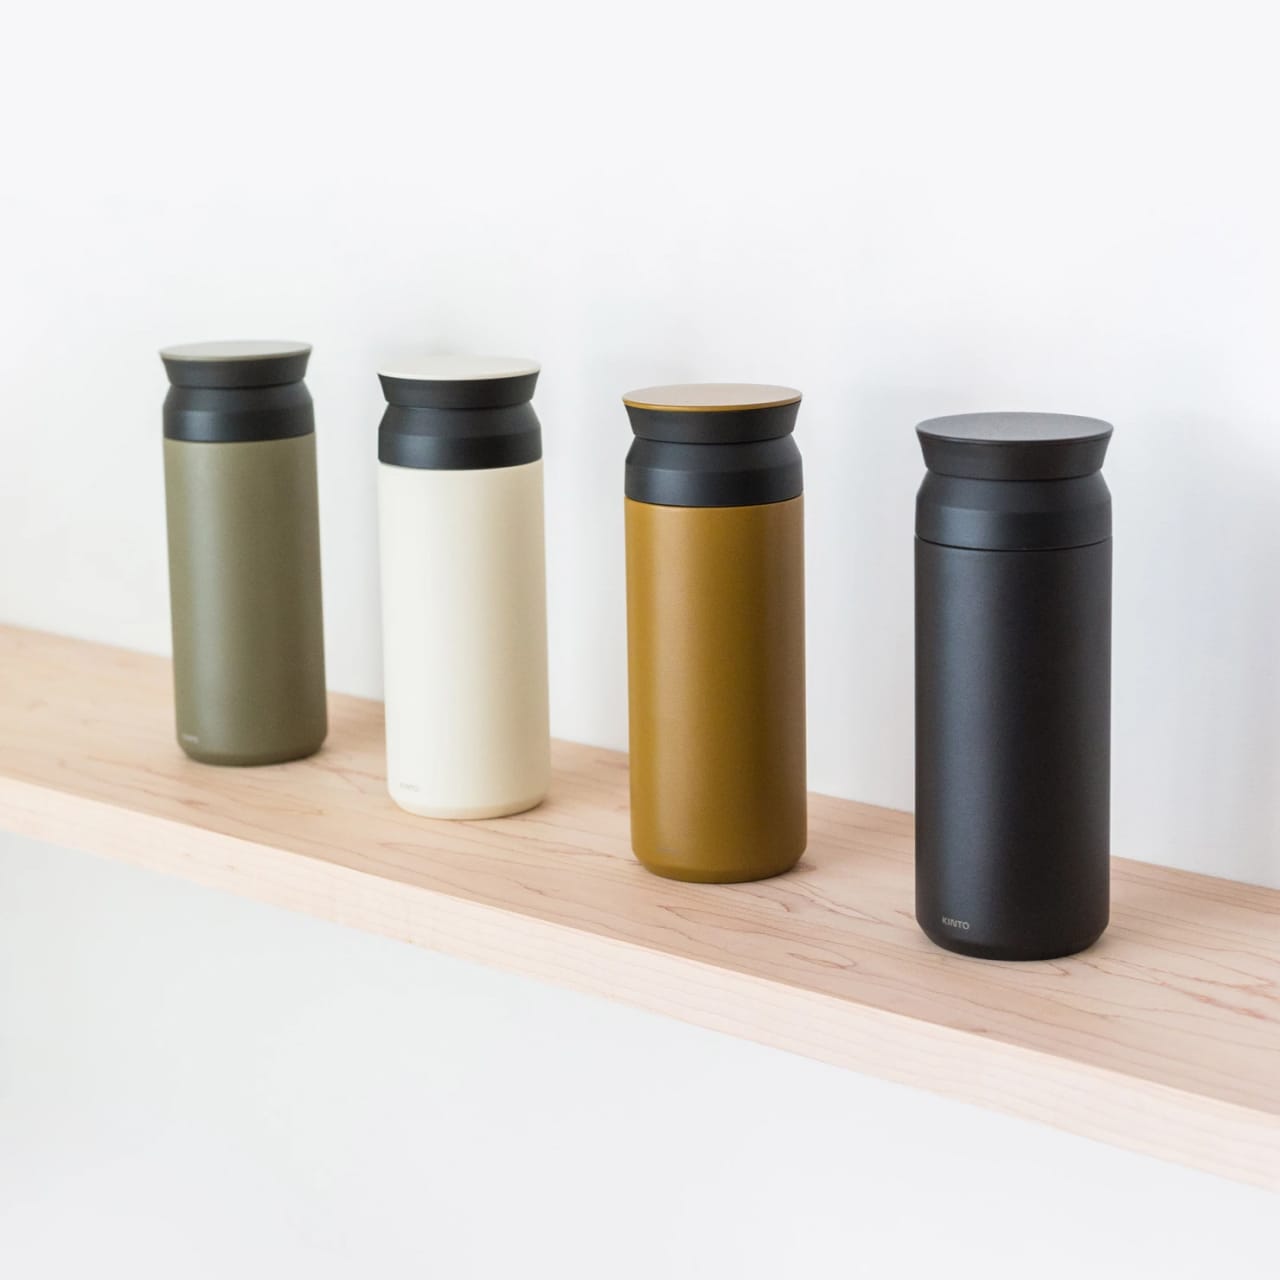 Collection of four insulated travel bottles on wooden shelf.